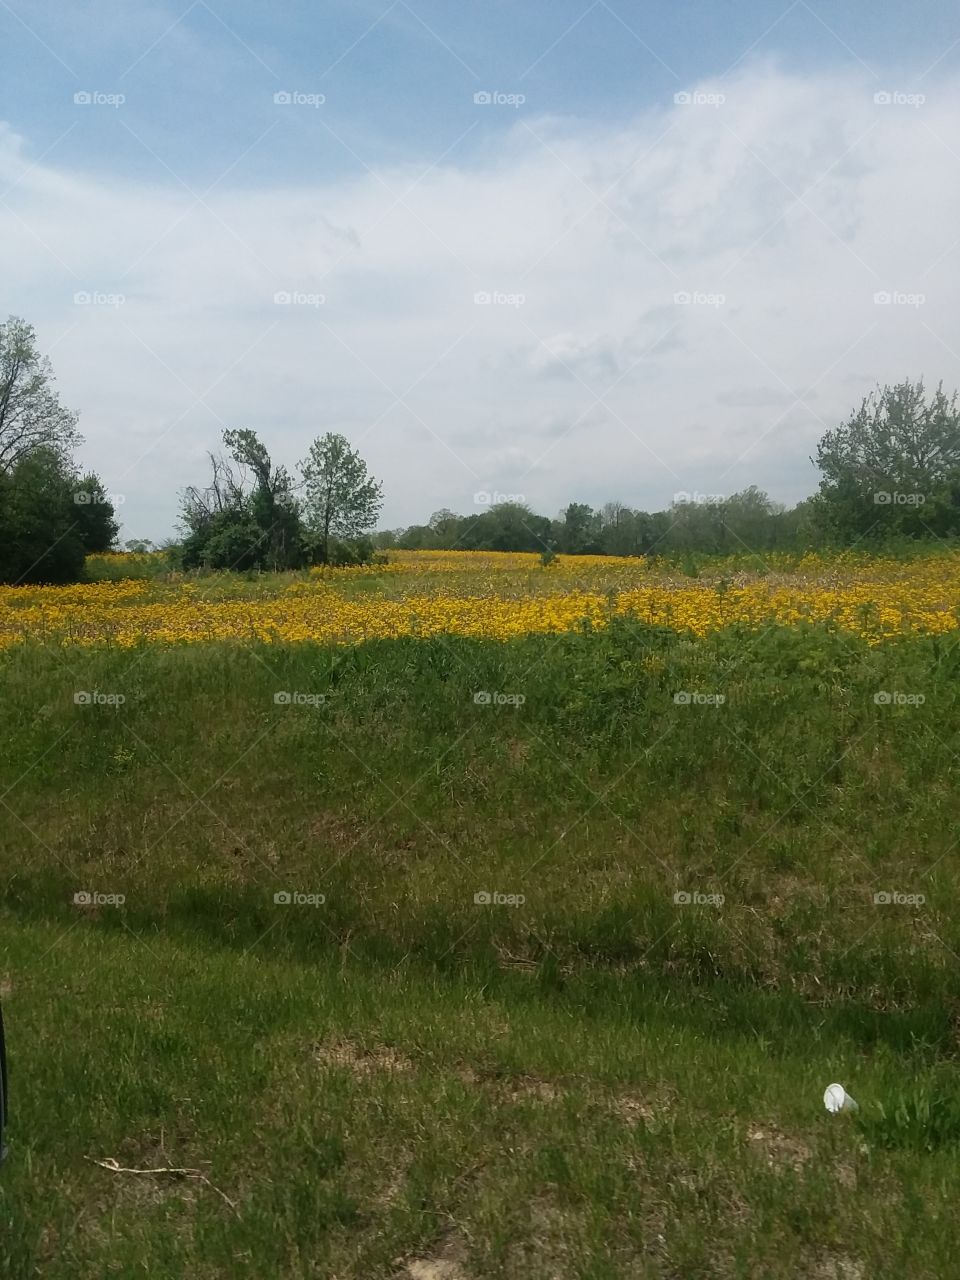 Beautiful yellow floral field Ross County Chillicothe, Ohio